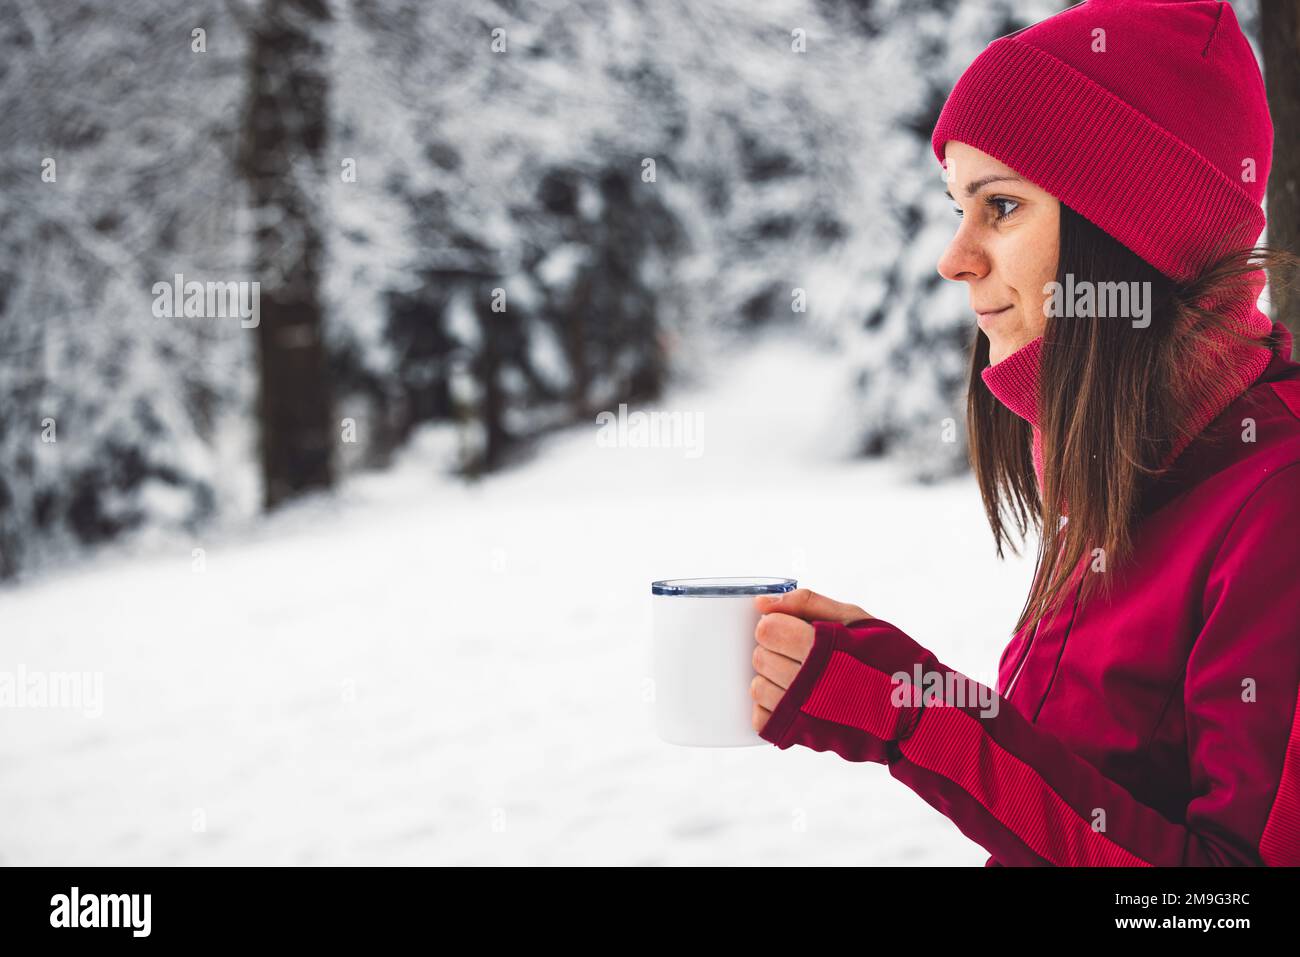 Side profile, waist up, woman in red jacket and hat drinking hot tea in the middle of a snowy winter forest Stock Photo